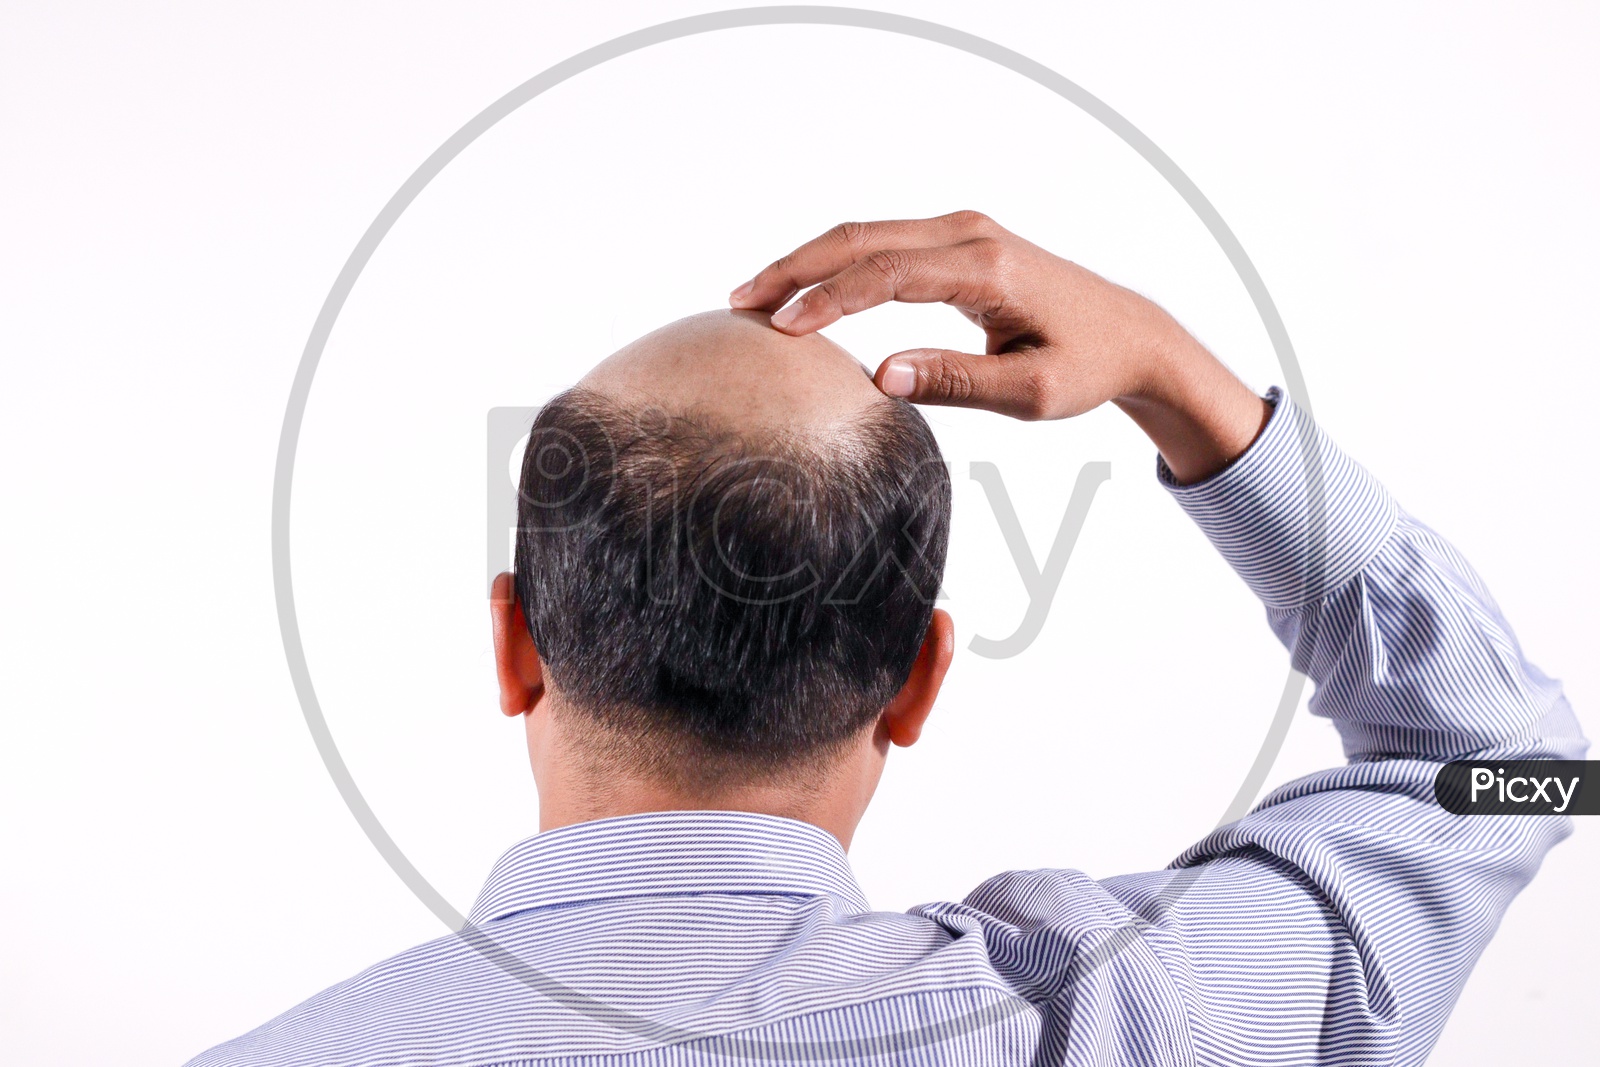 Bald Businessman With His Head On Scalp View From Behind With White Background, Hair Loss